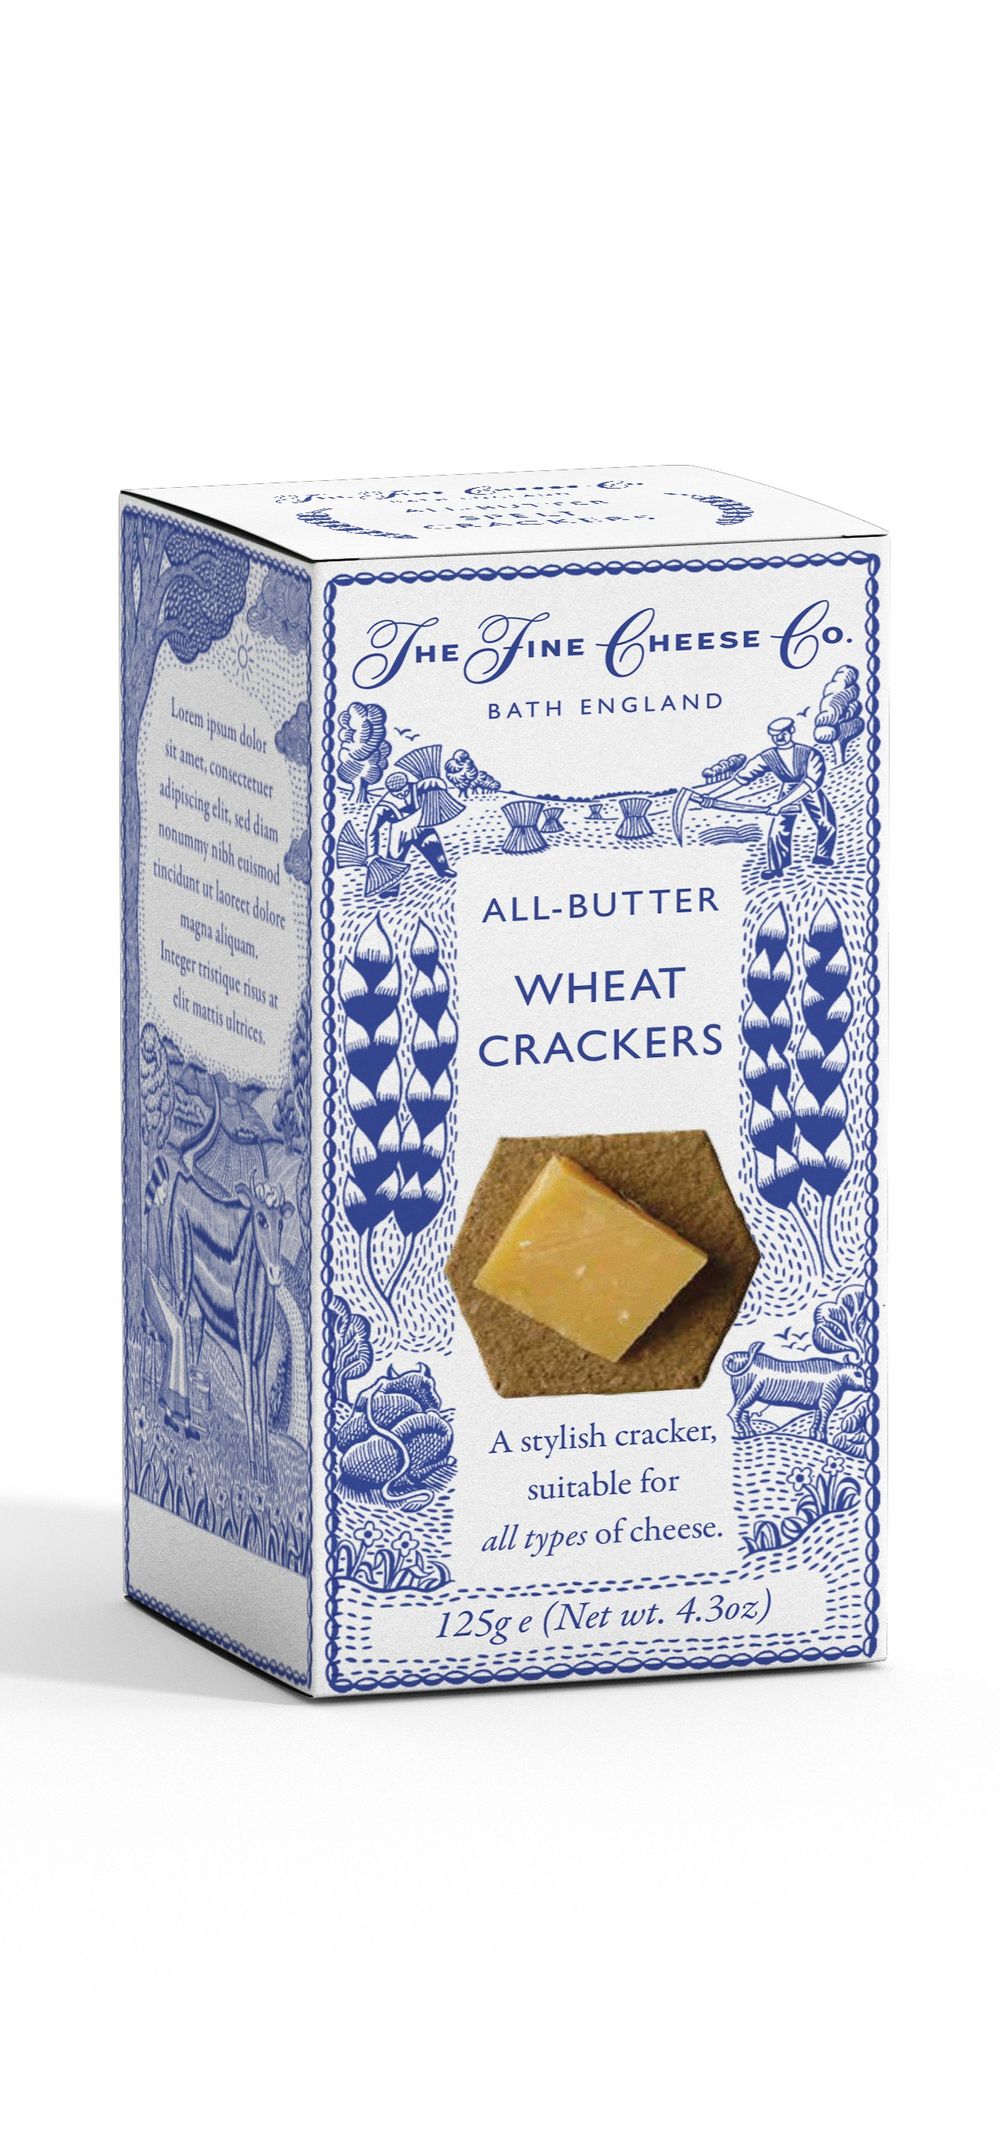 All-Butter Wheat Crackers